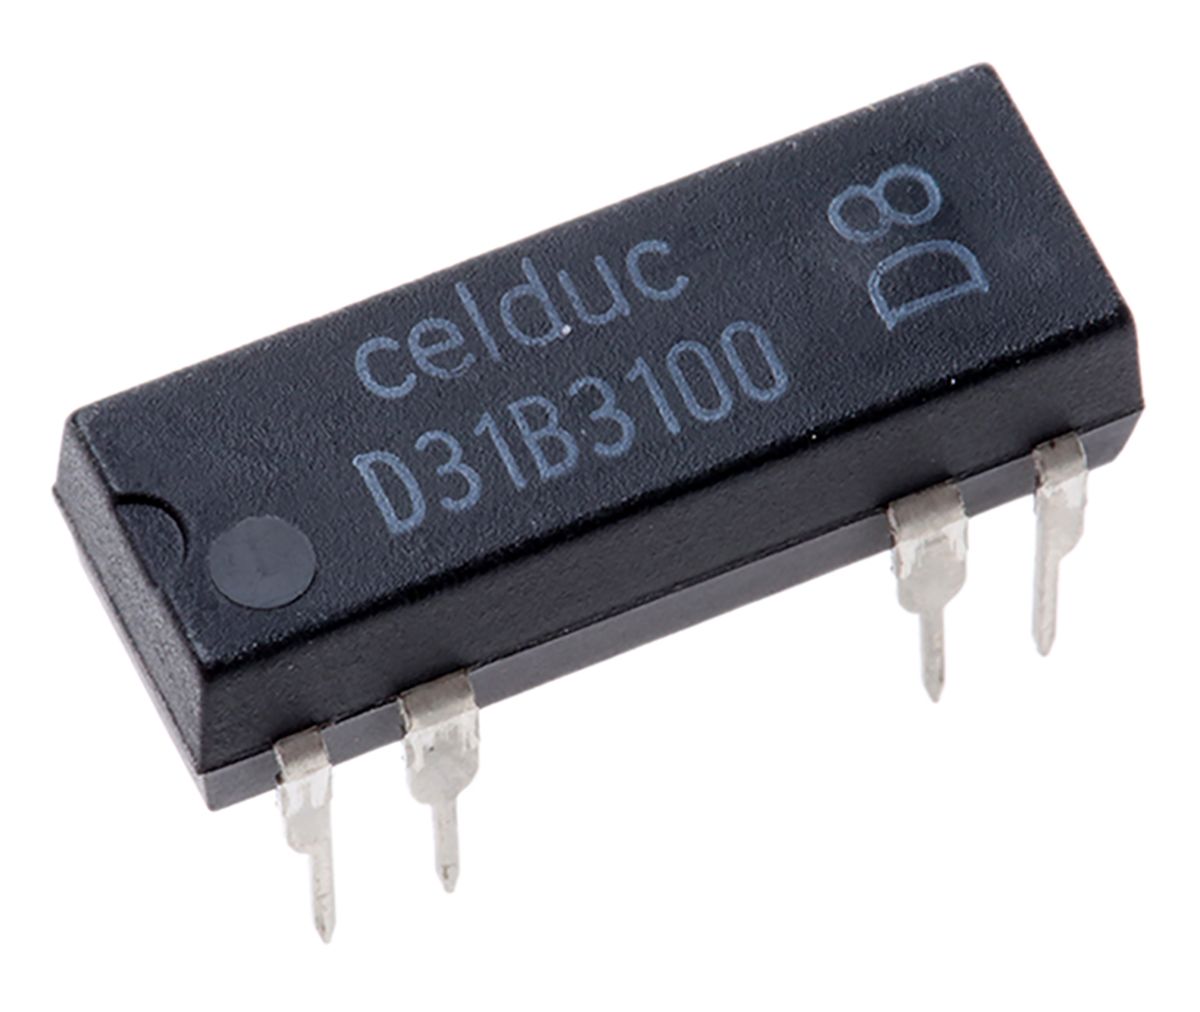 Celduc Plug In Reed Relay, 5V dc Coil, SP-NC, 100V dc Max, 500Ω